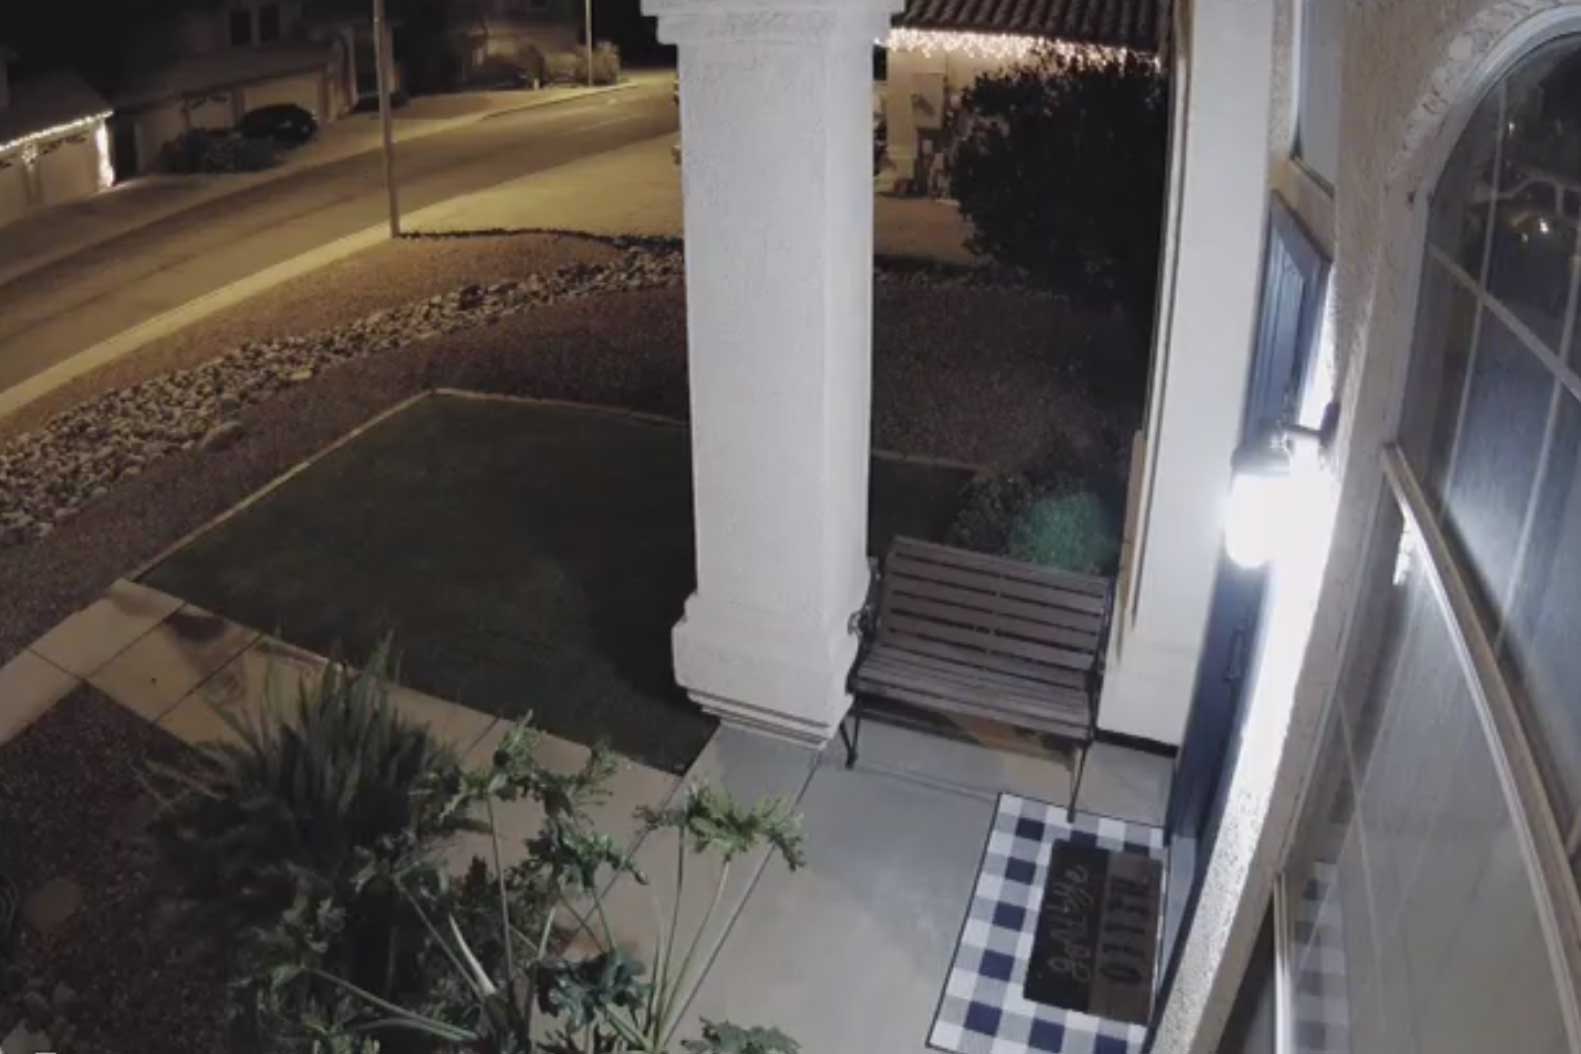 Our experience with Lorex security cameras